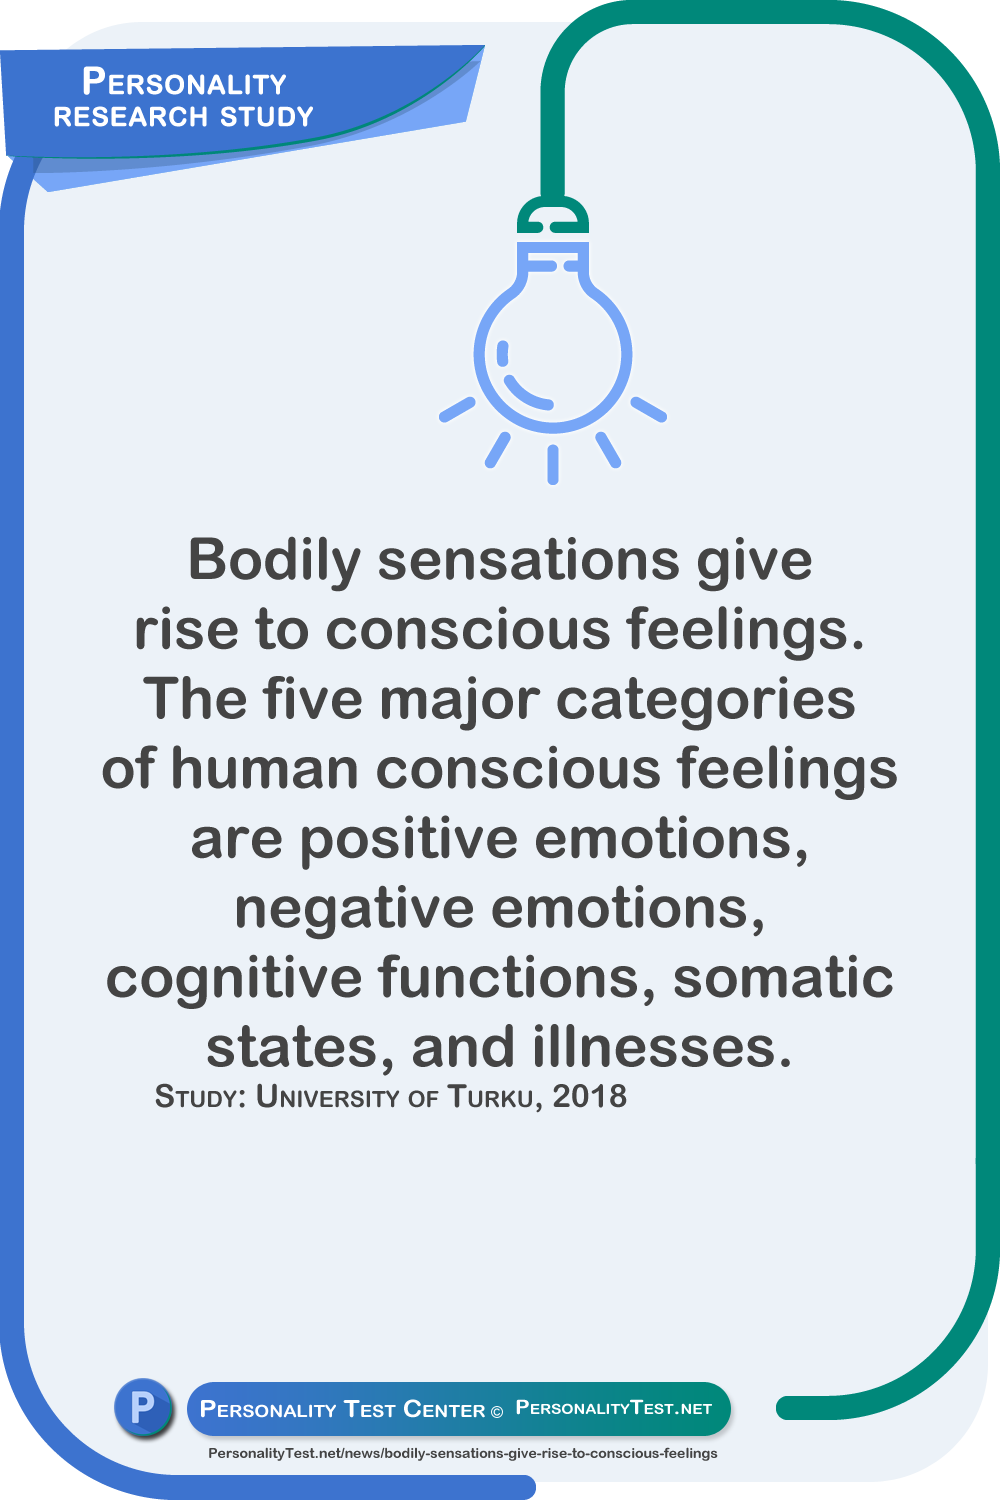 Bodily sensations give rise to conscious feelings. The five major categories of human conscious feelings are positive emotions, negative emotions, cognitive functions, somatic states, and illnesses. Study: University of Turku, 2018